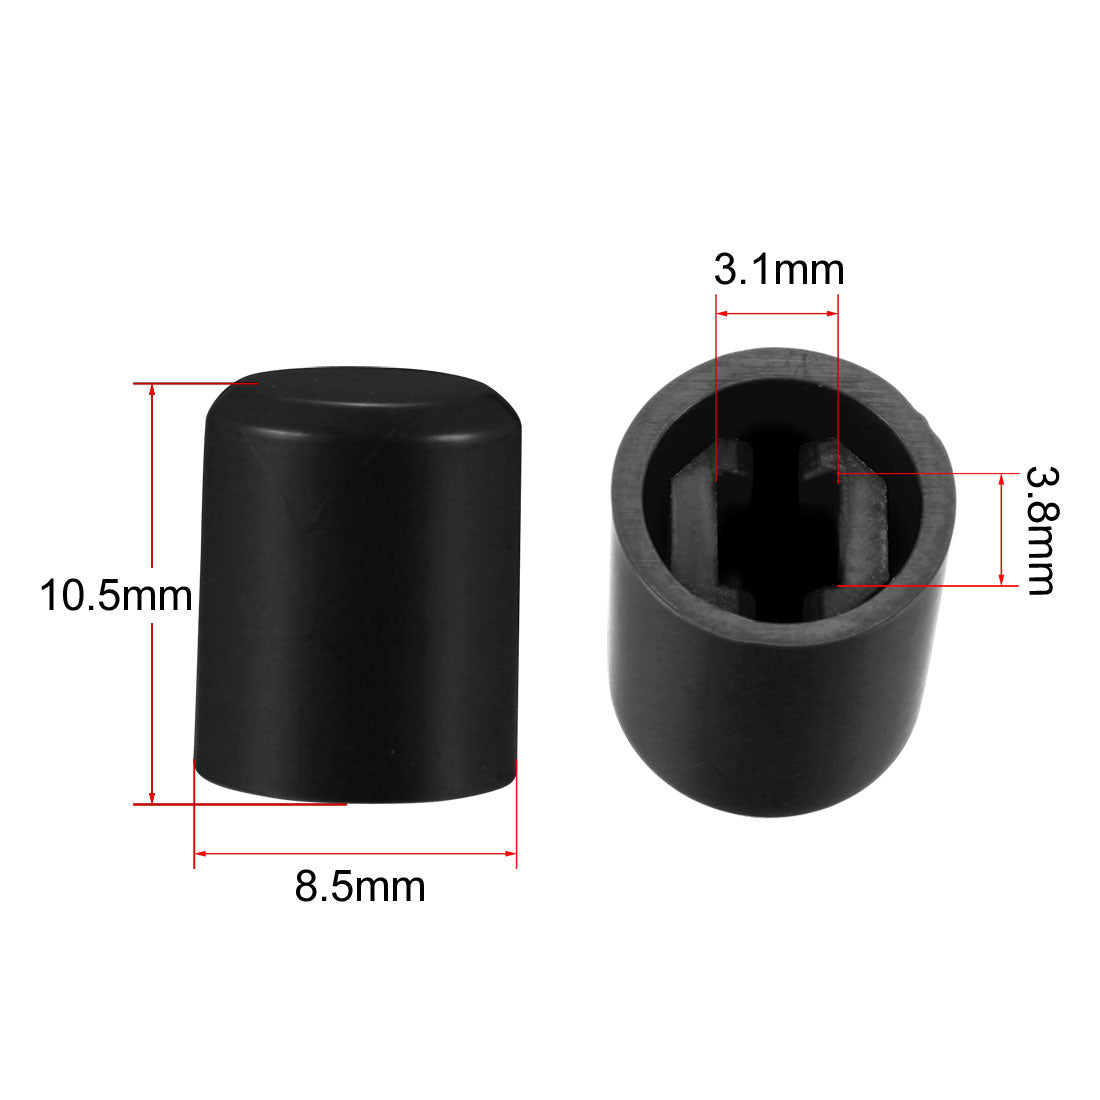 uxcell Uxcell 20Pcs 3.1mm Hole Dia Plastic Push Button Tactile Switch Caps Cover Keycaps Protector Black for 6x6 Micro Switch